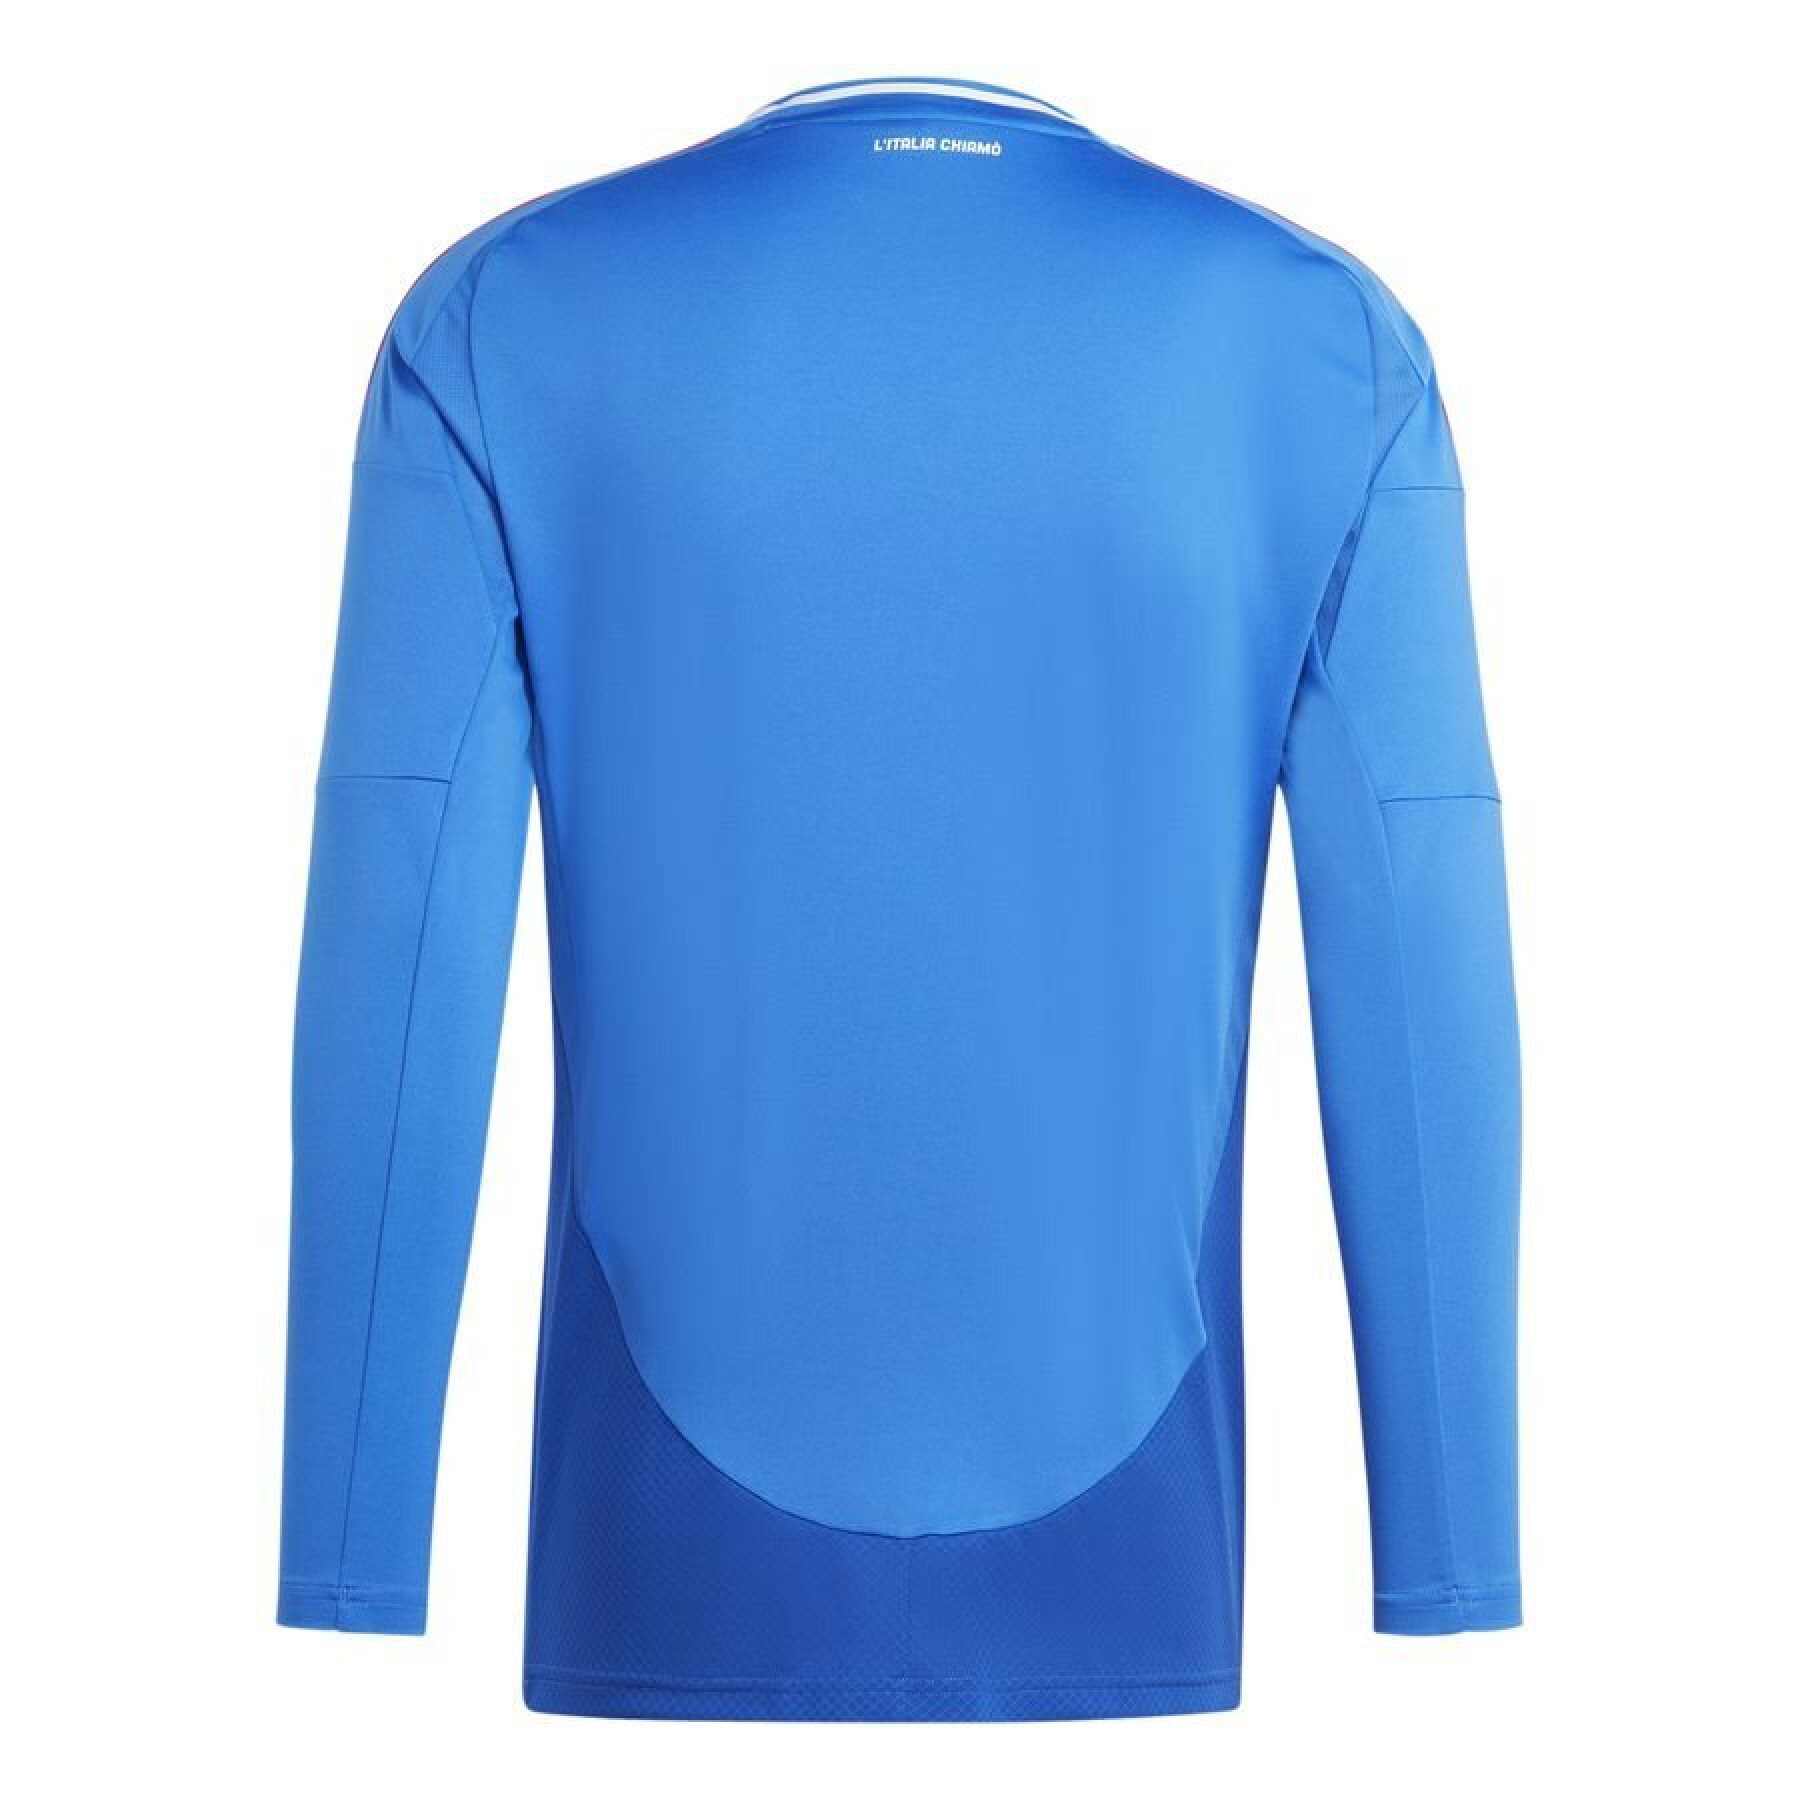 Long-sleeved home jersey Italie Euro 2024